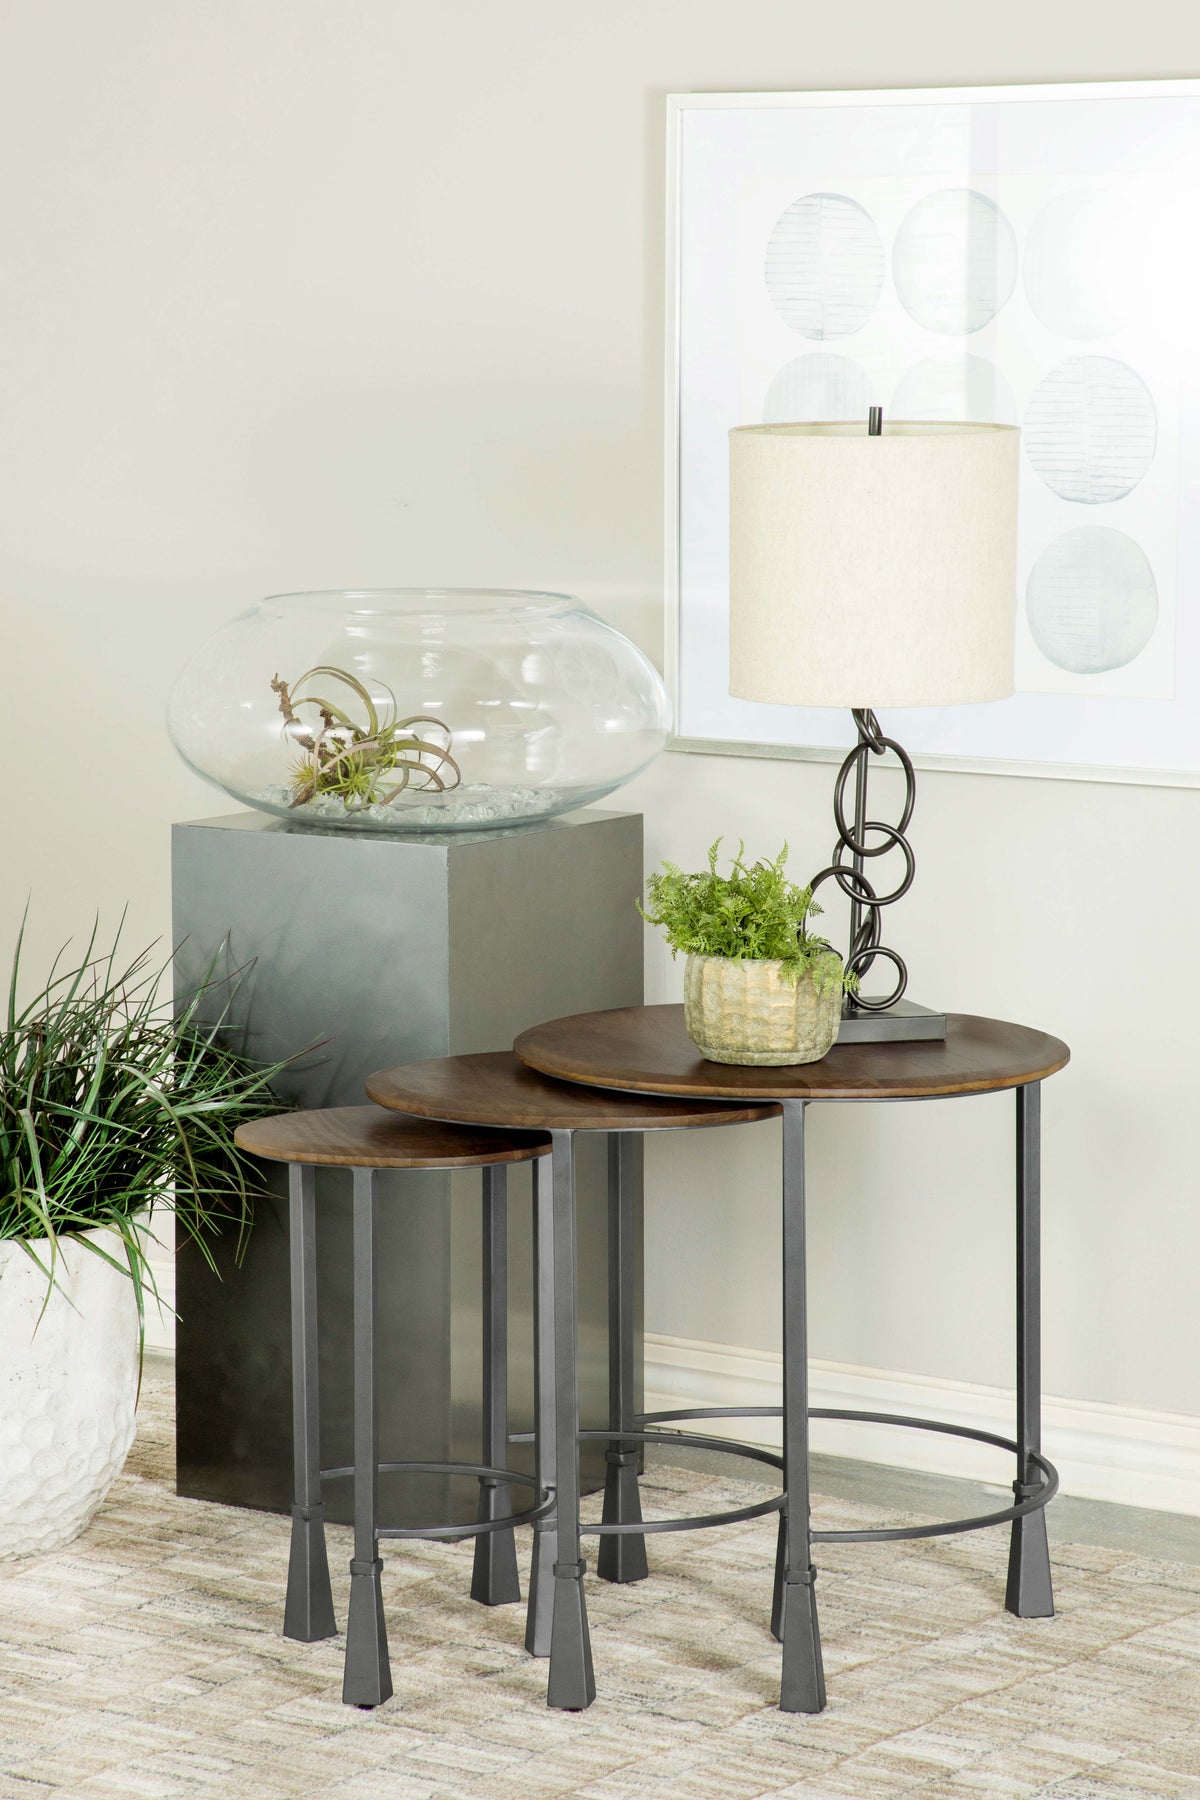 Deja 3-piece Round Nesting Table Natural and Gunmetal Deja 3-piece Round Nesting Table Natural and Gunmetal Half Price Furniture